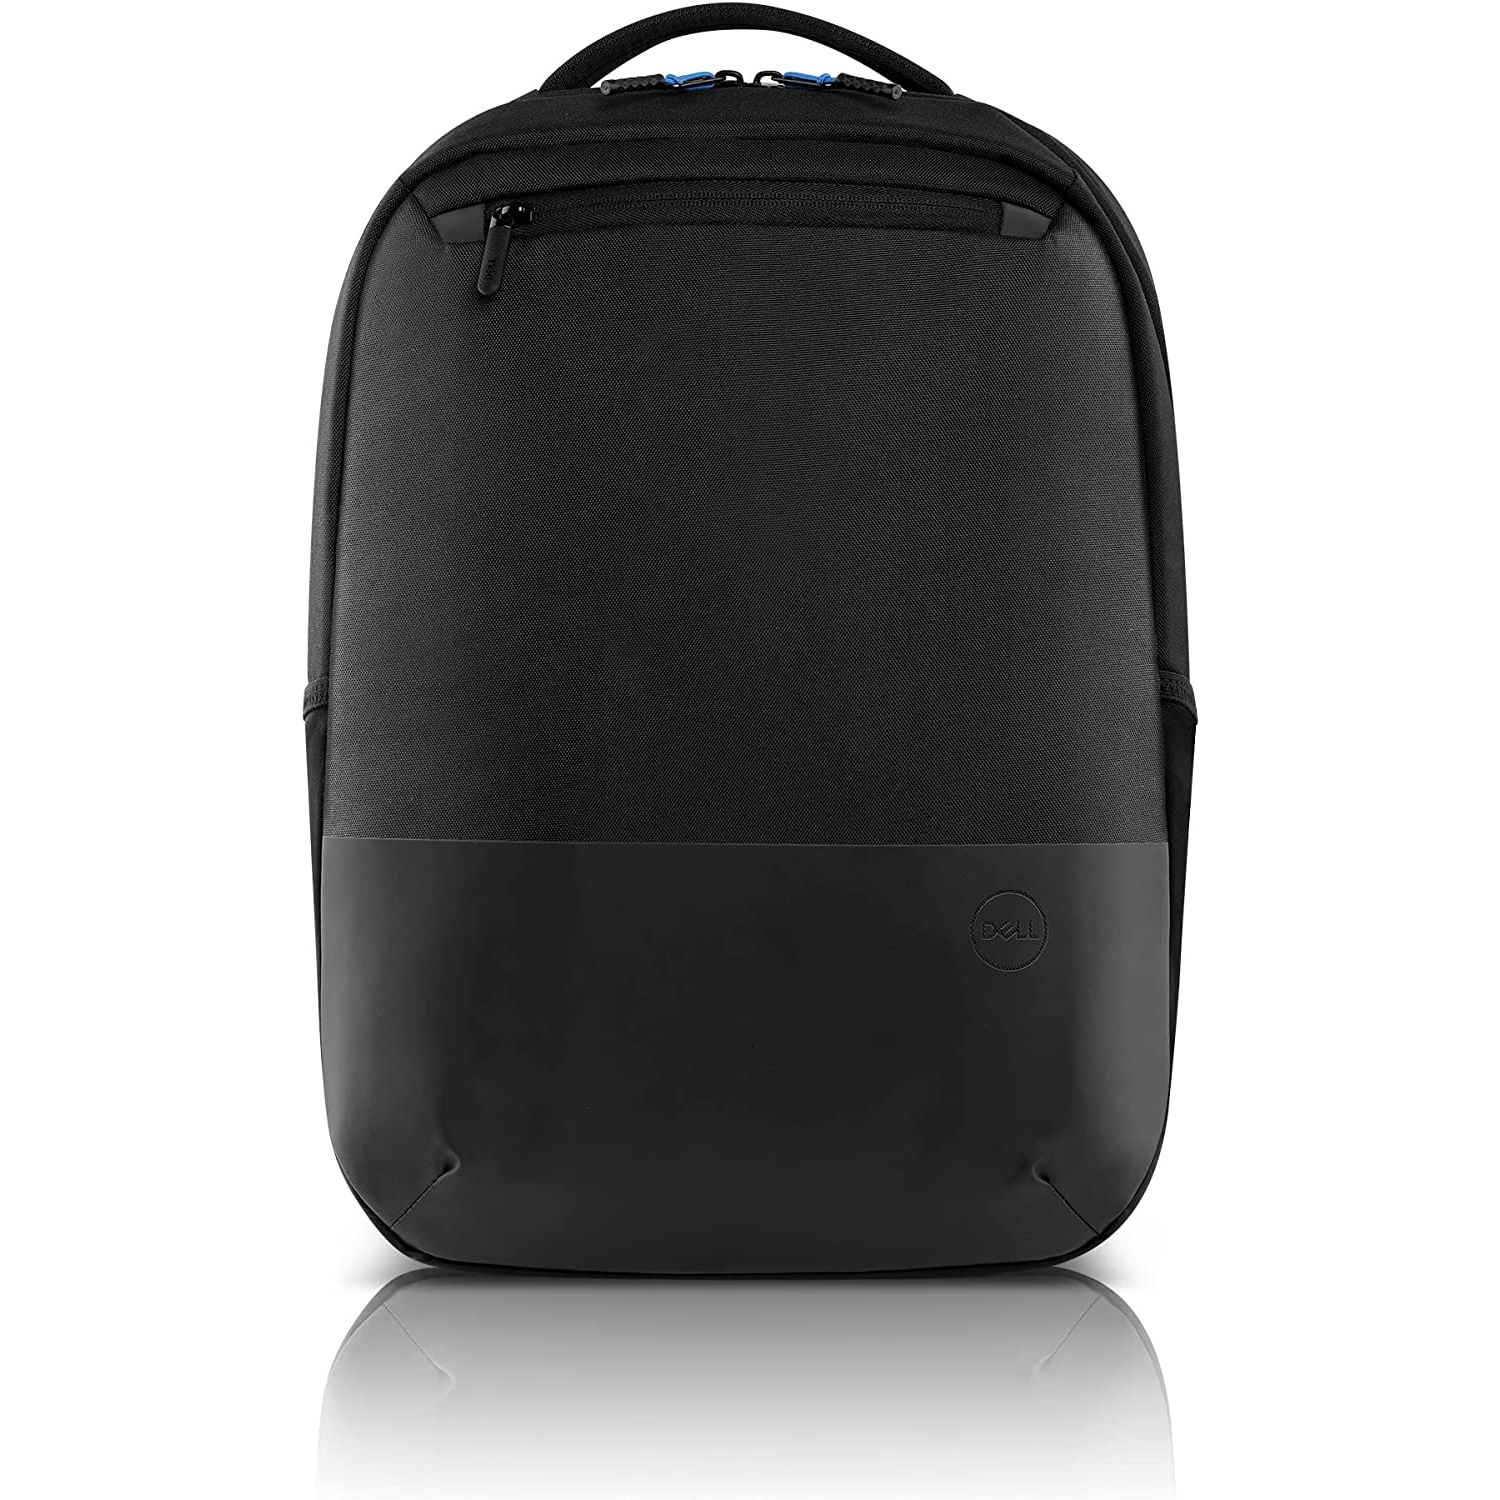 dell-pro-slim-backpack-15-po1520ps-fits-most-laptops-up-to-15-กระเป๋าเป้แล็ปท็อป-ของแท้